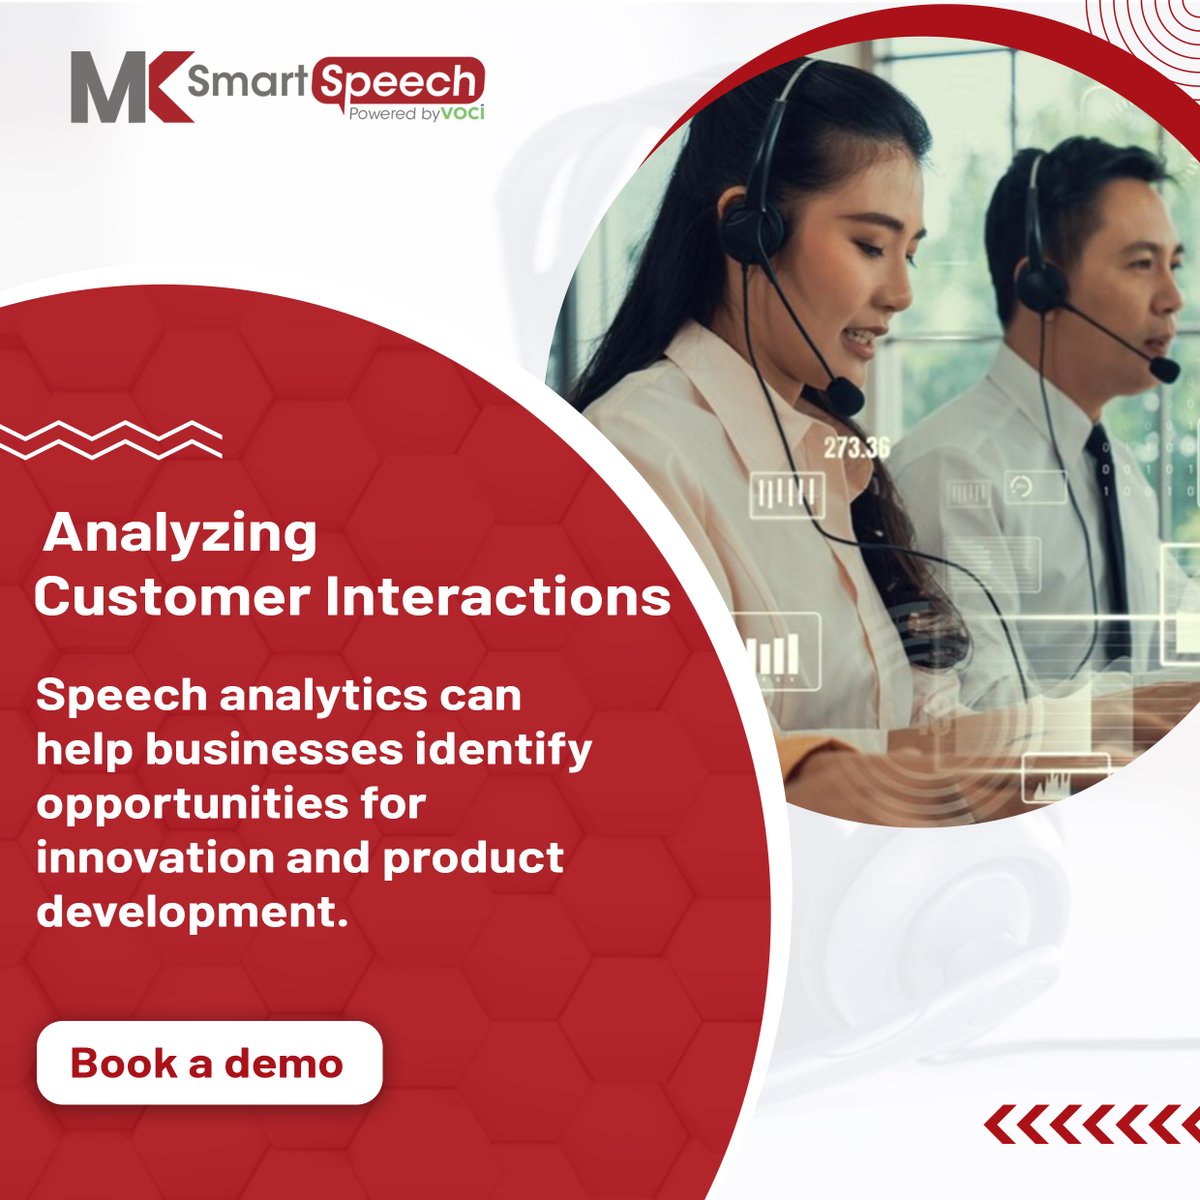 Unleash the power of data-driven insights and enhance #customerinteractions with advanced analytics technology that helps you make informed decisions. 👥🔎 - Schedule a Demo >> lnkd.in/eMbnh2wg

#speechanalytics #dataanalytics #customersuccess #CX